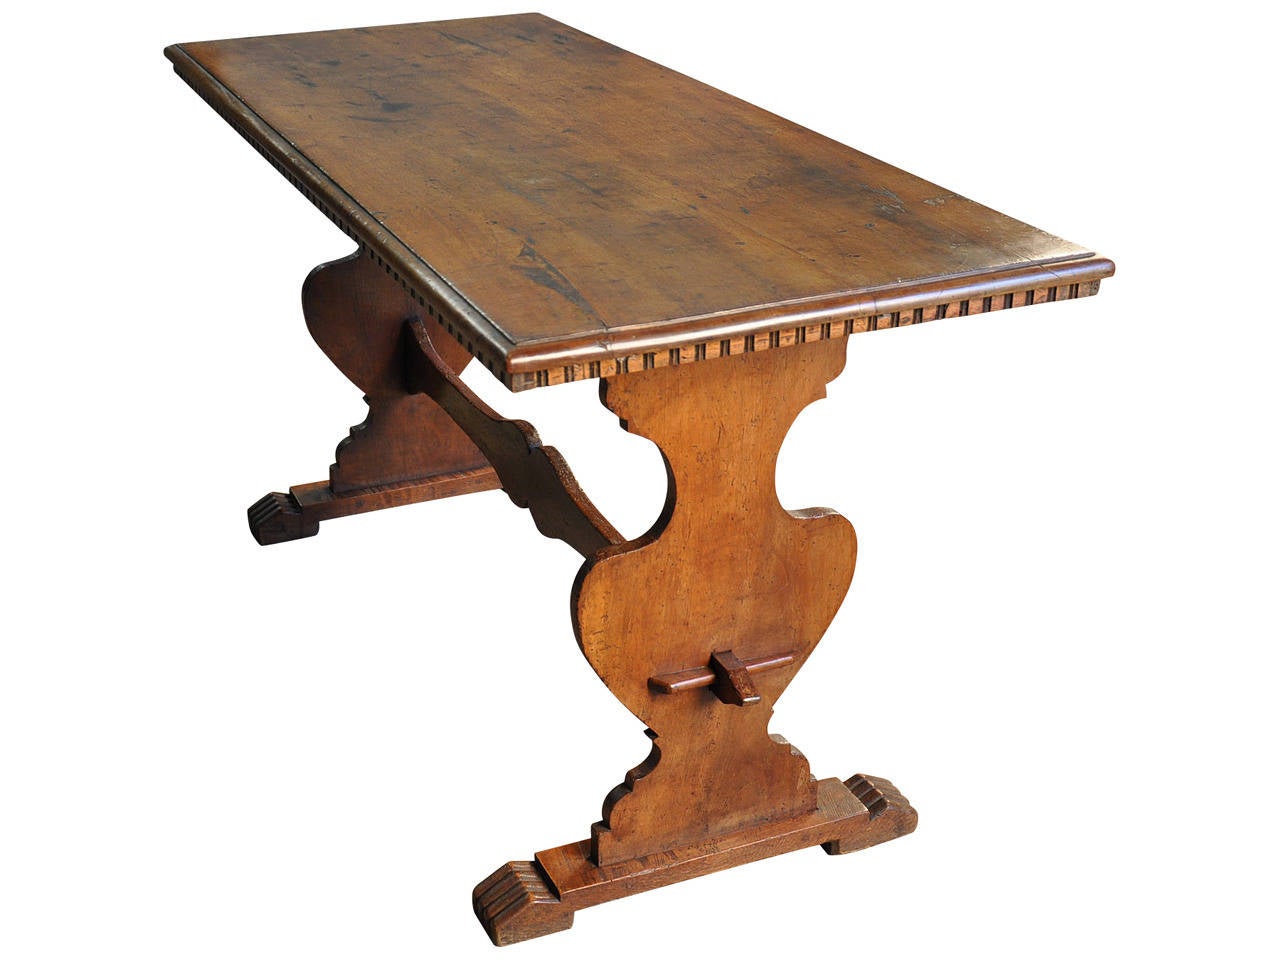 A very handsome late 18th century Italian trestle table/console in walnut.  This charming table's diminutive size lends this table to serve as an excellent writing desk, sofa table or small scale breakfast table.  It is beautifully constructed and